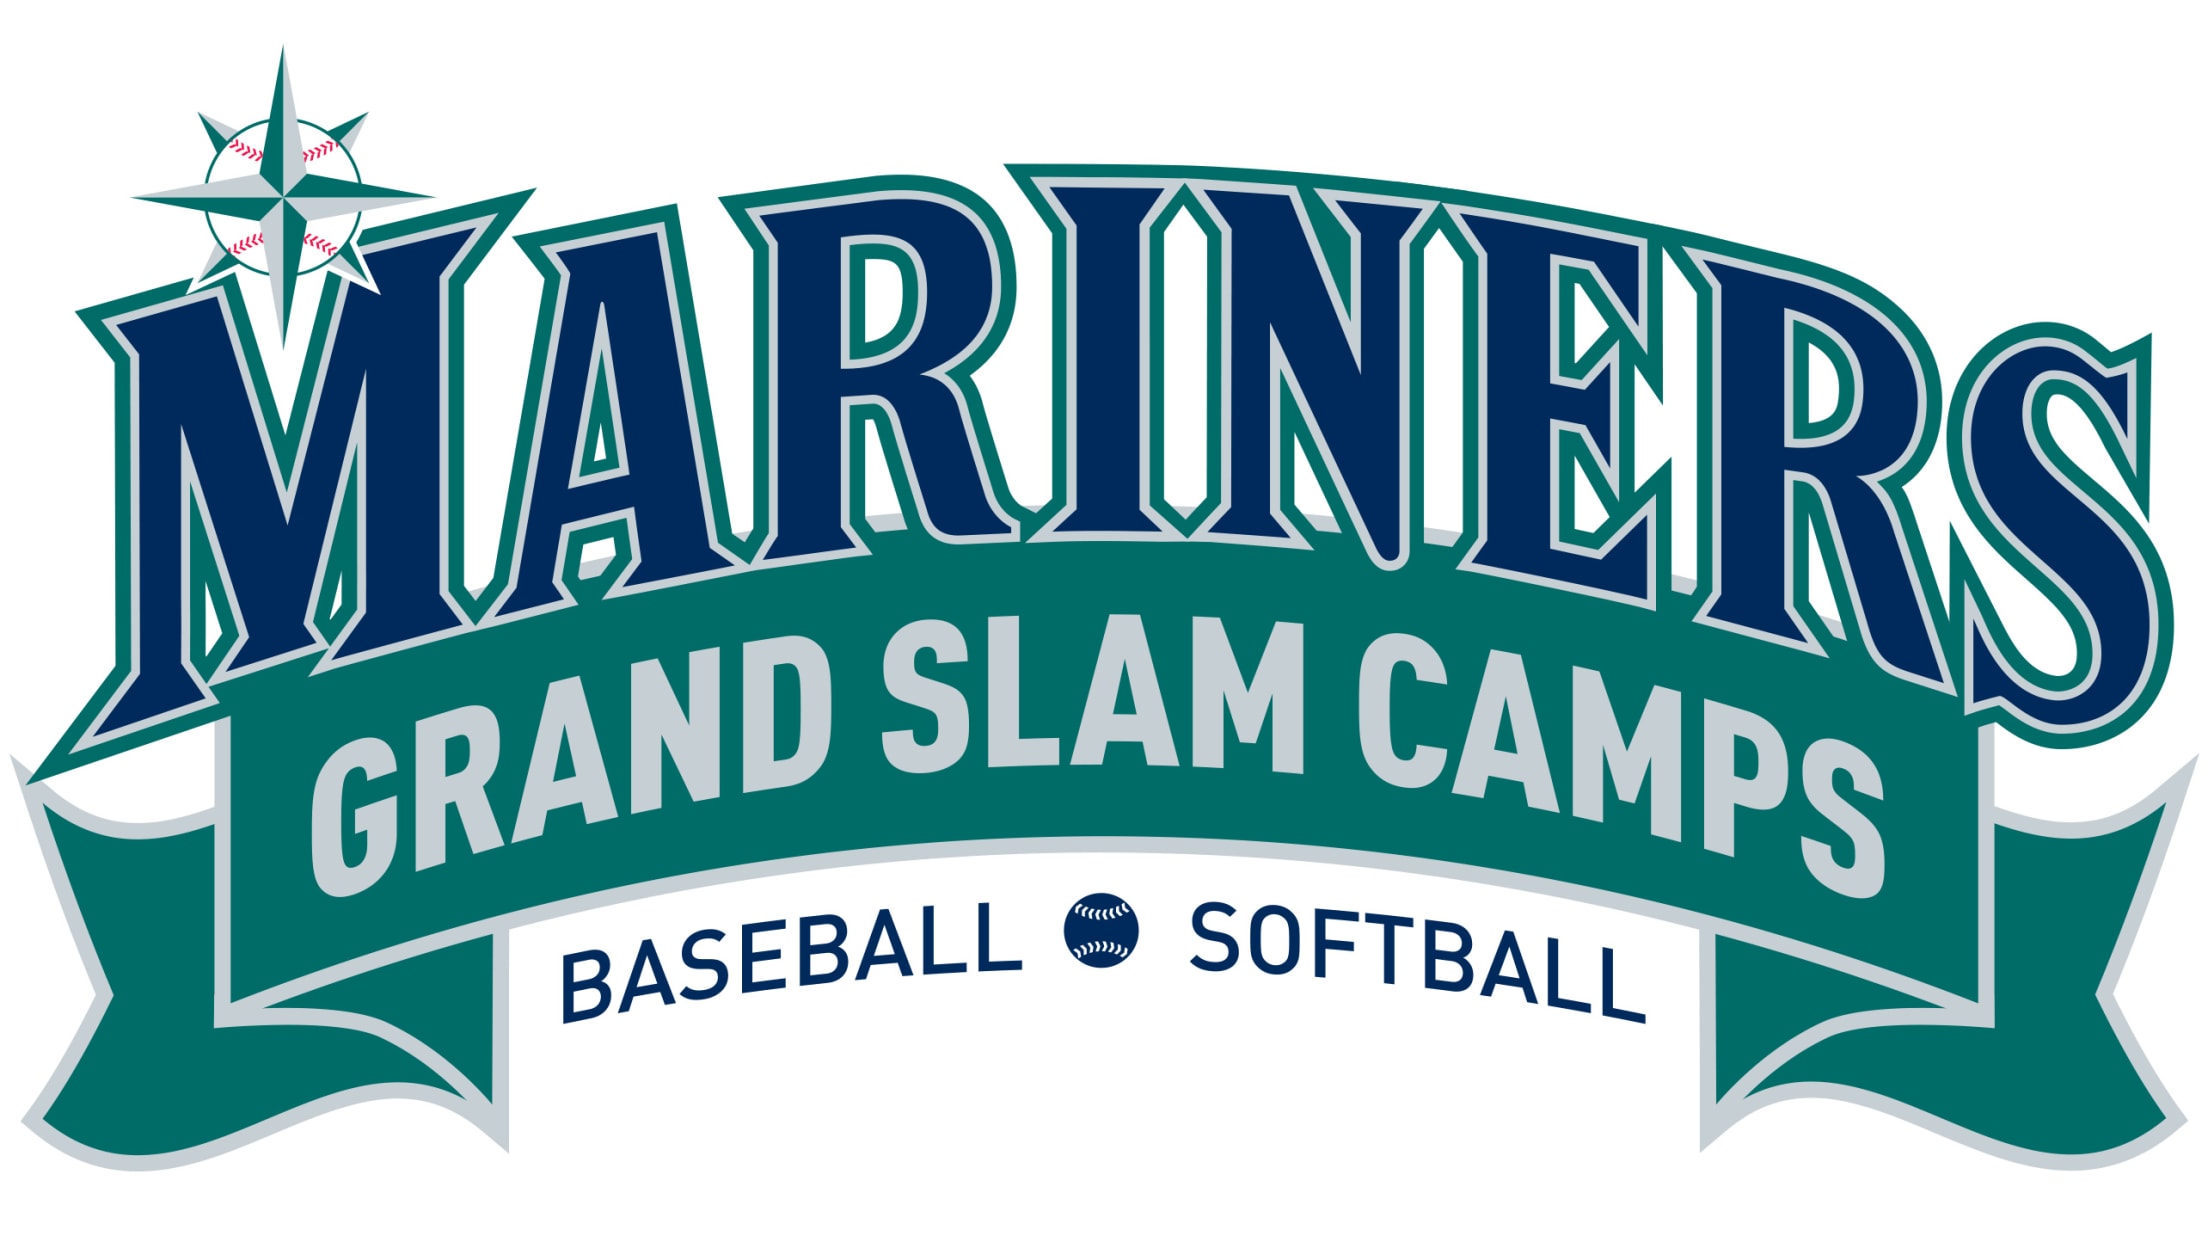 Mariners Grand Slam Camps Seattle Mariners